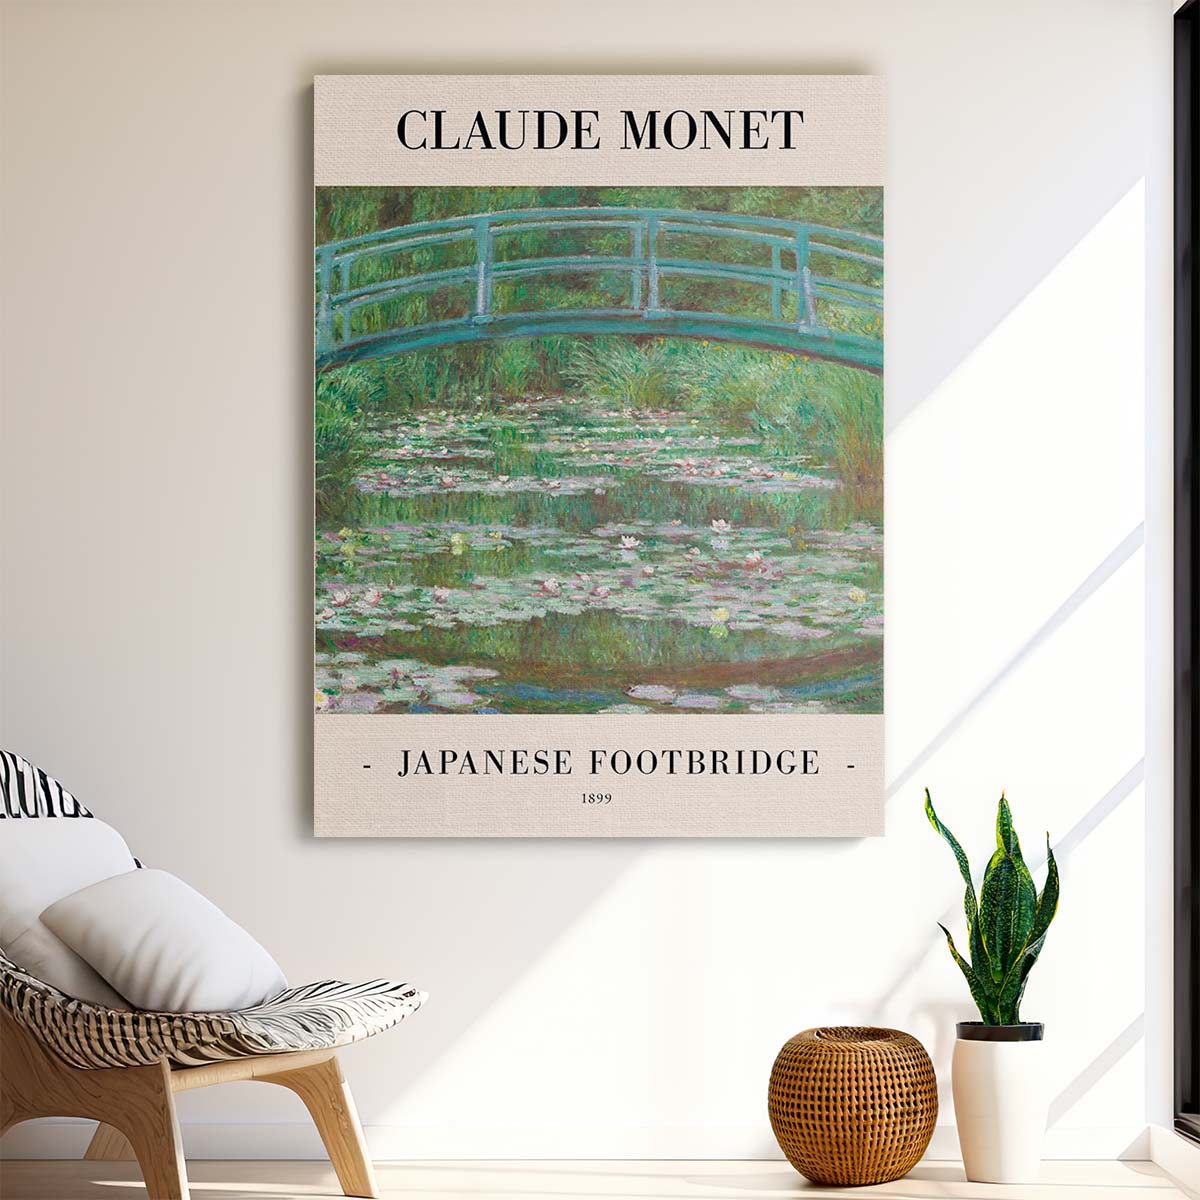 Claude Monet's 1899 Japanese Footbridge Oil Painting Illustration by Luxuriance Designs, made in USA